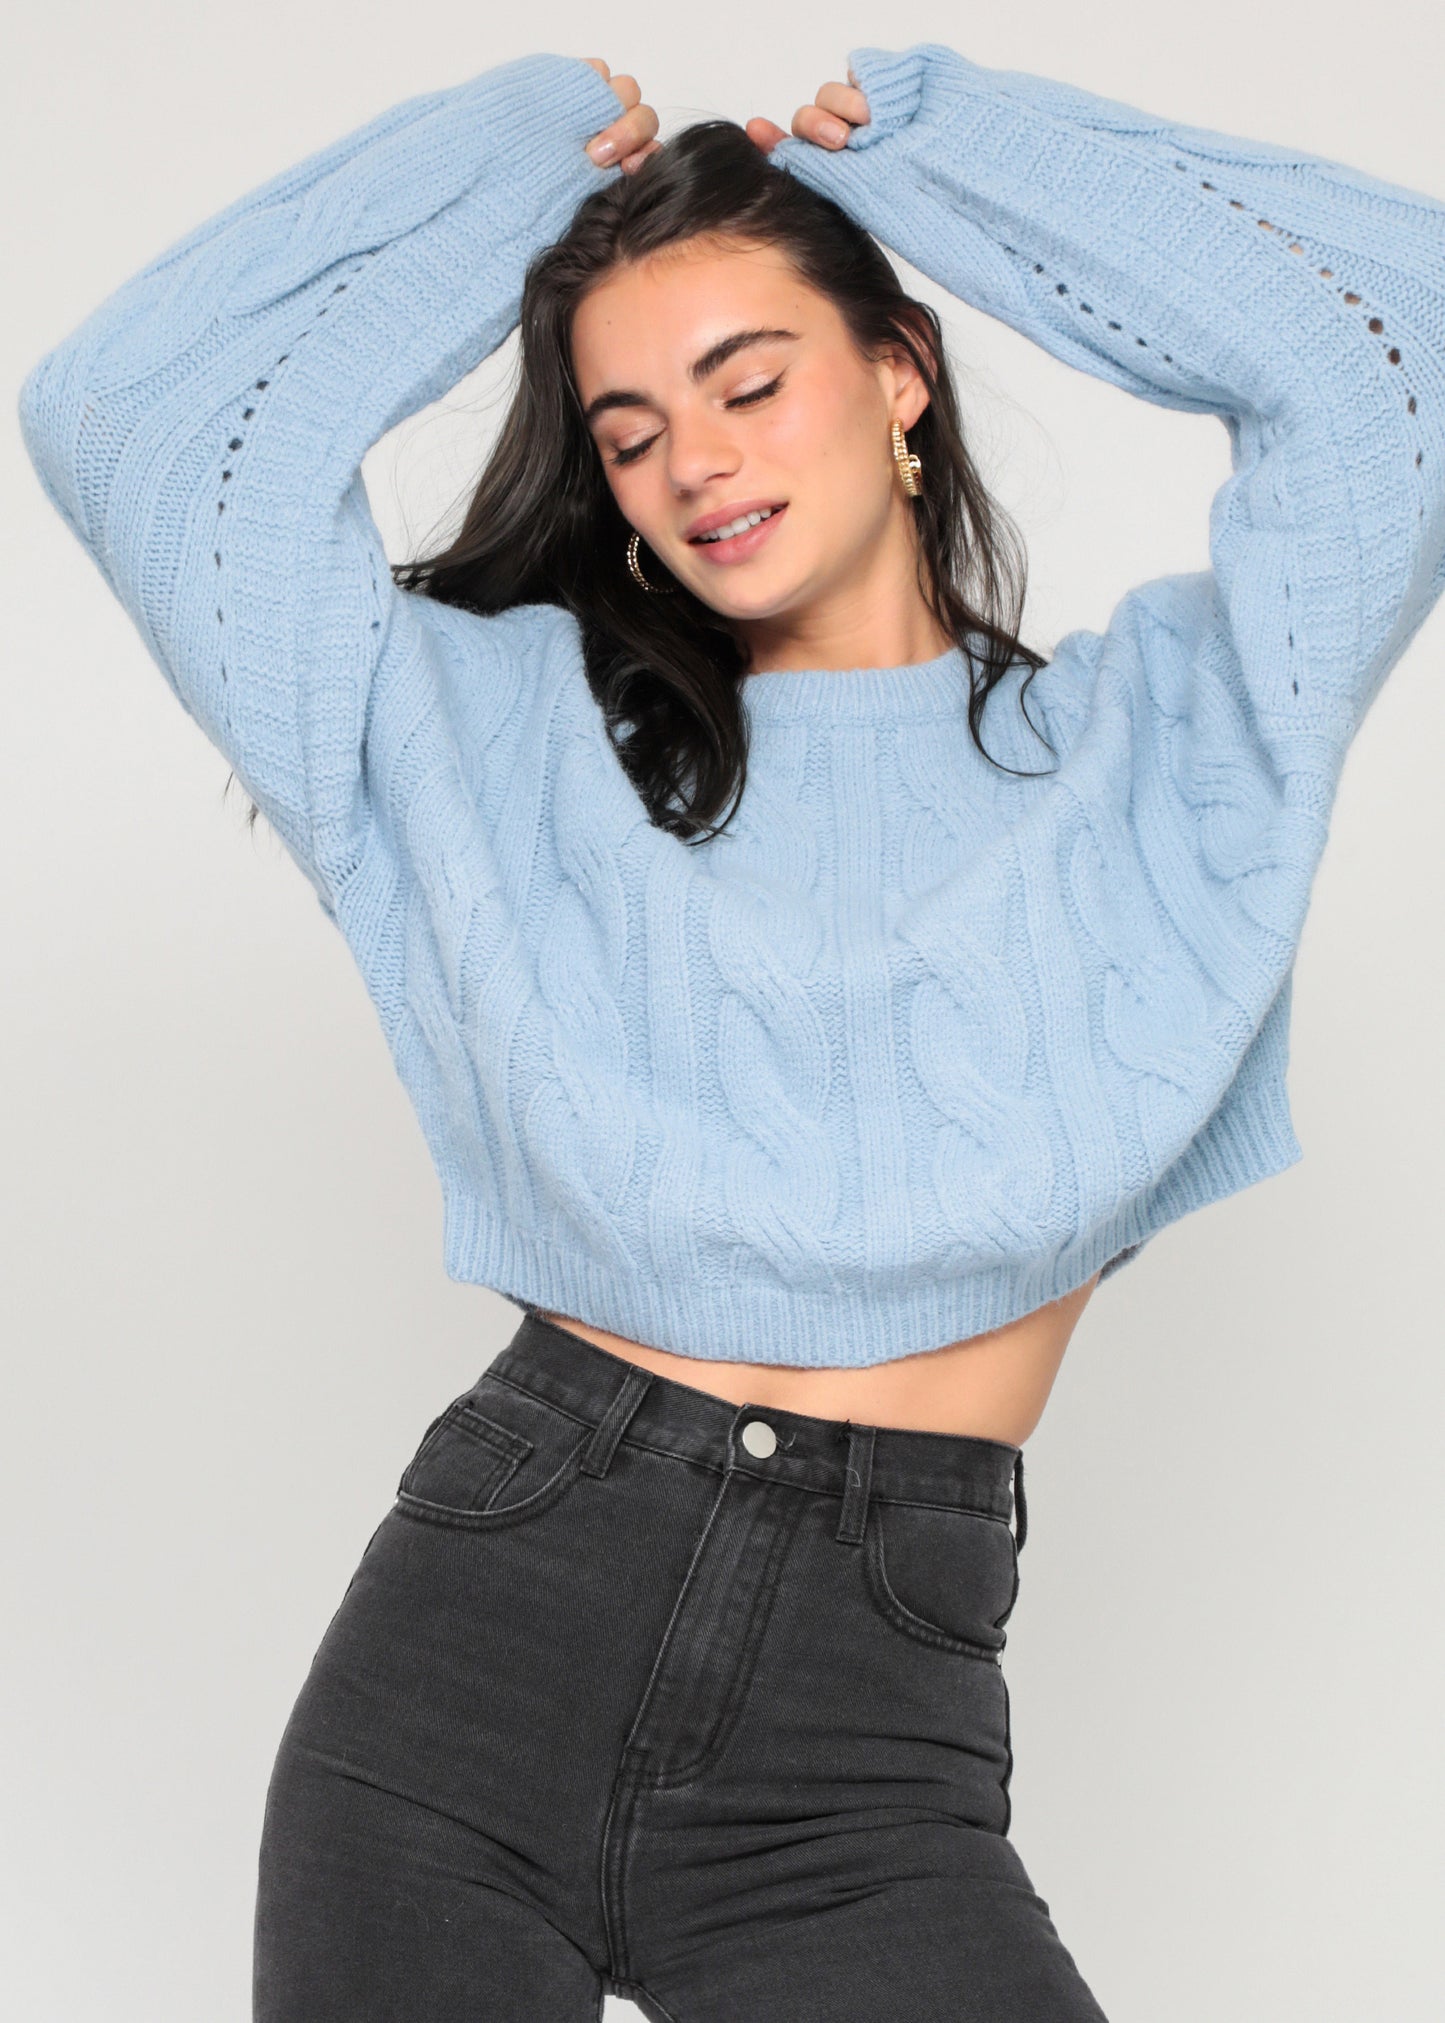 Cable knit jumper in blue